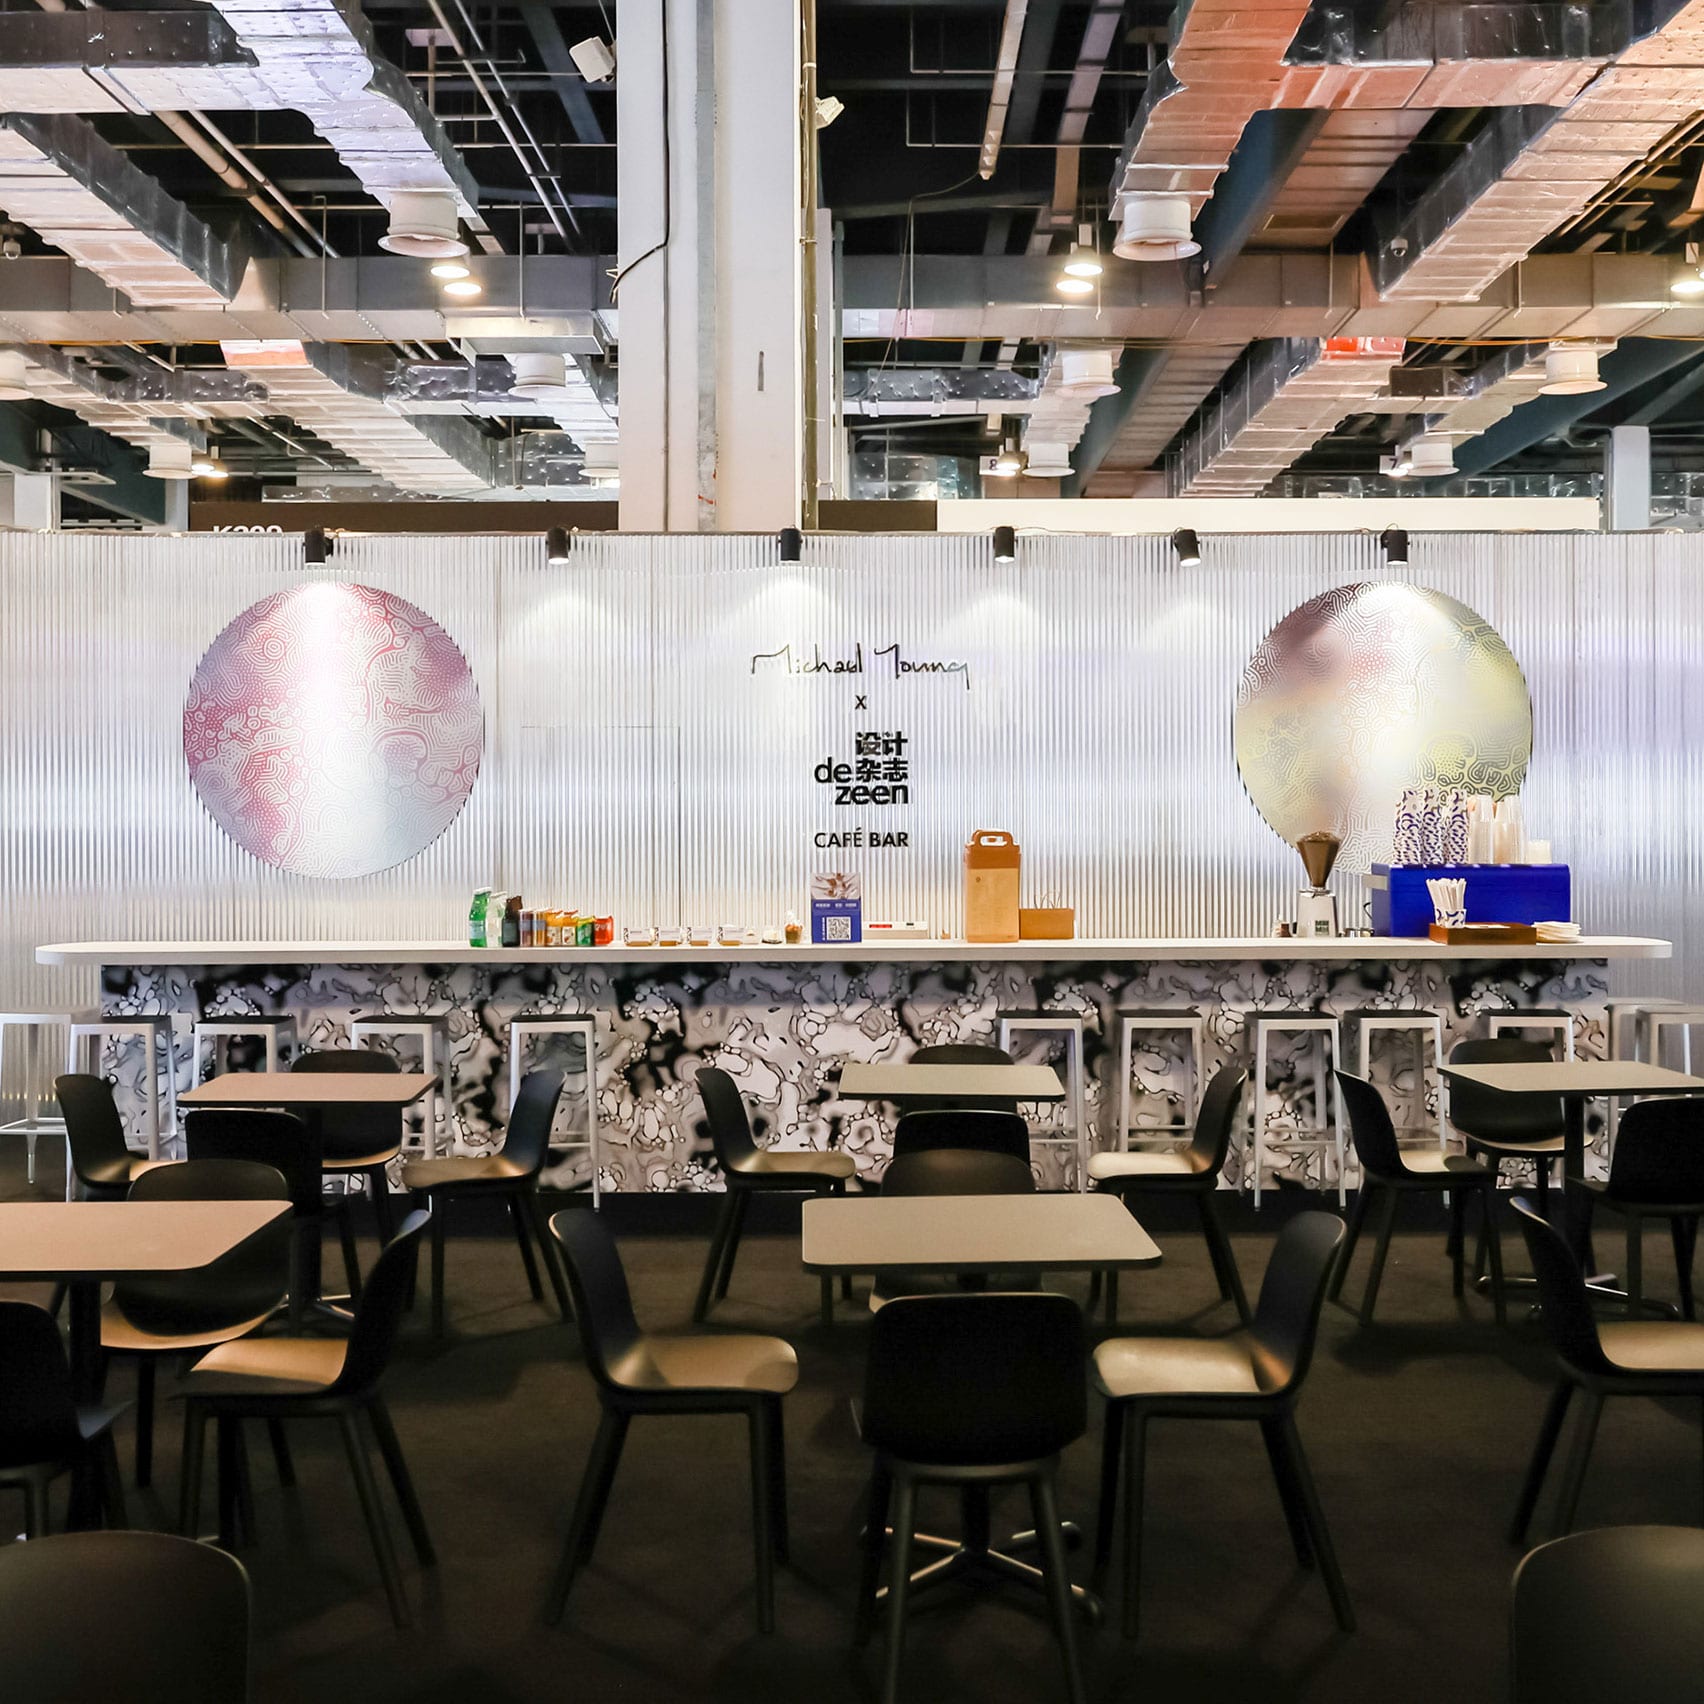 Dezeen presents cafe bar designed by Michael Young at Design Shanghai